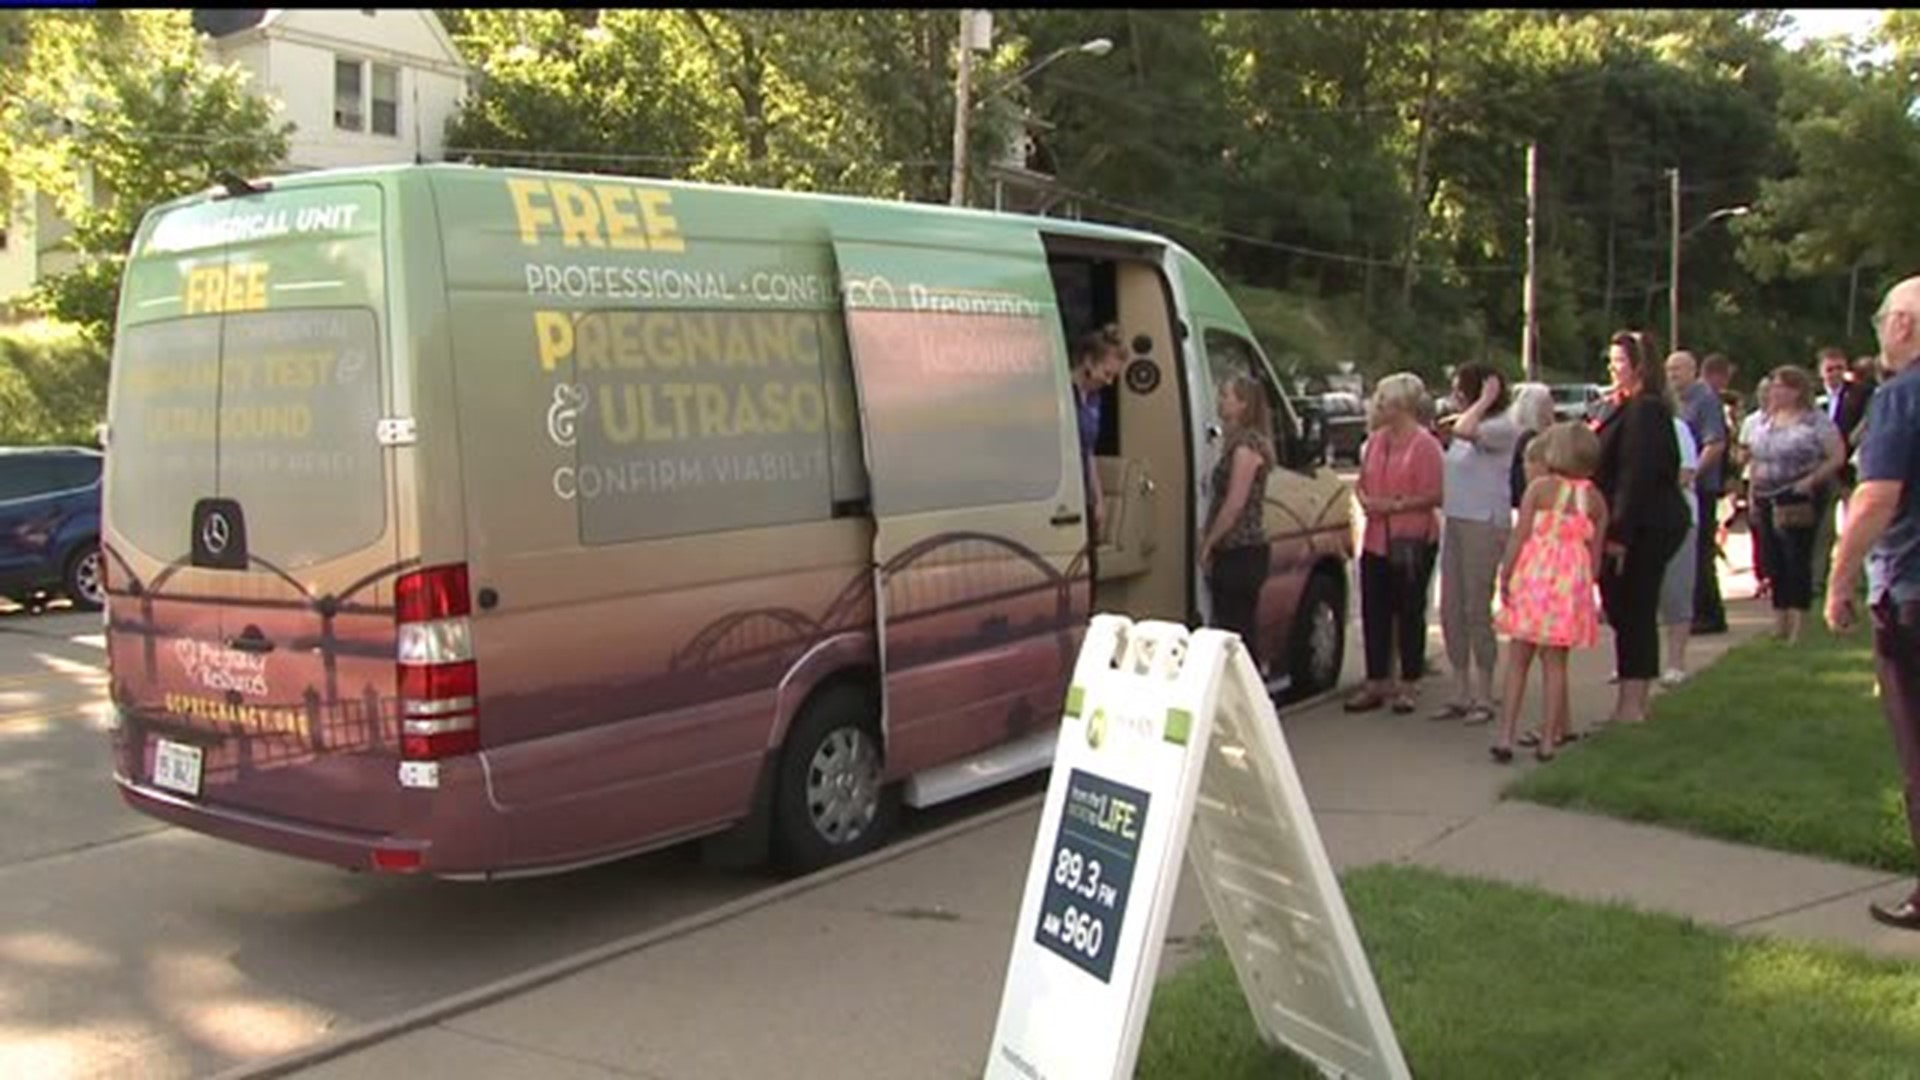 Traveling medical center offers free pregnancy services